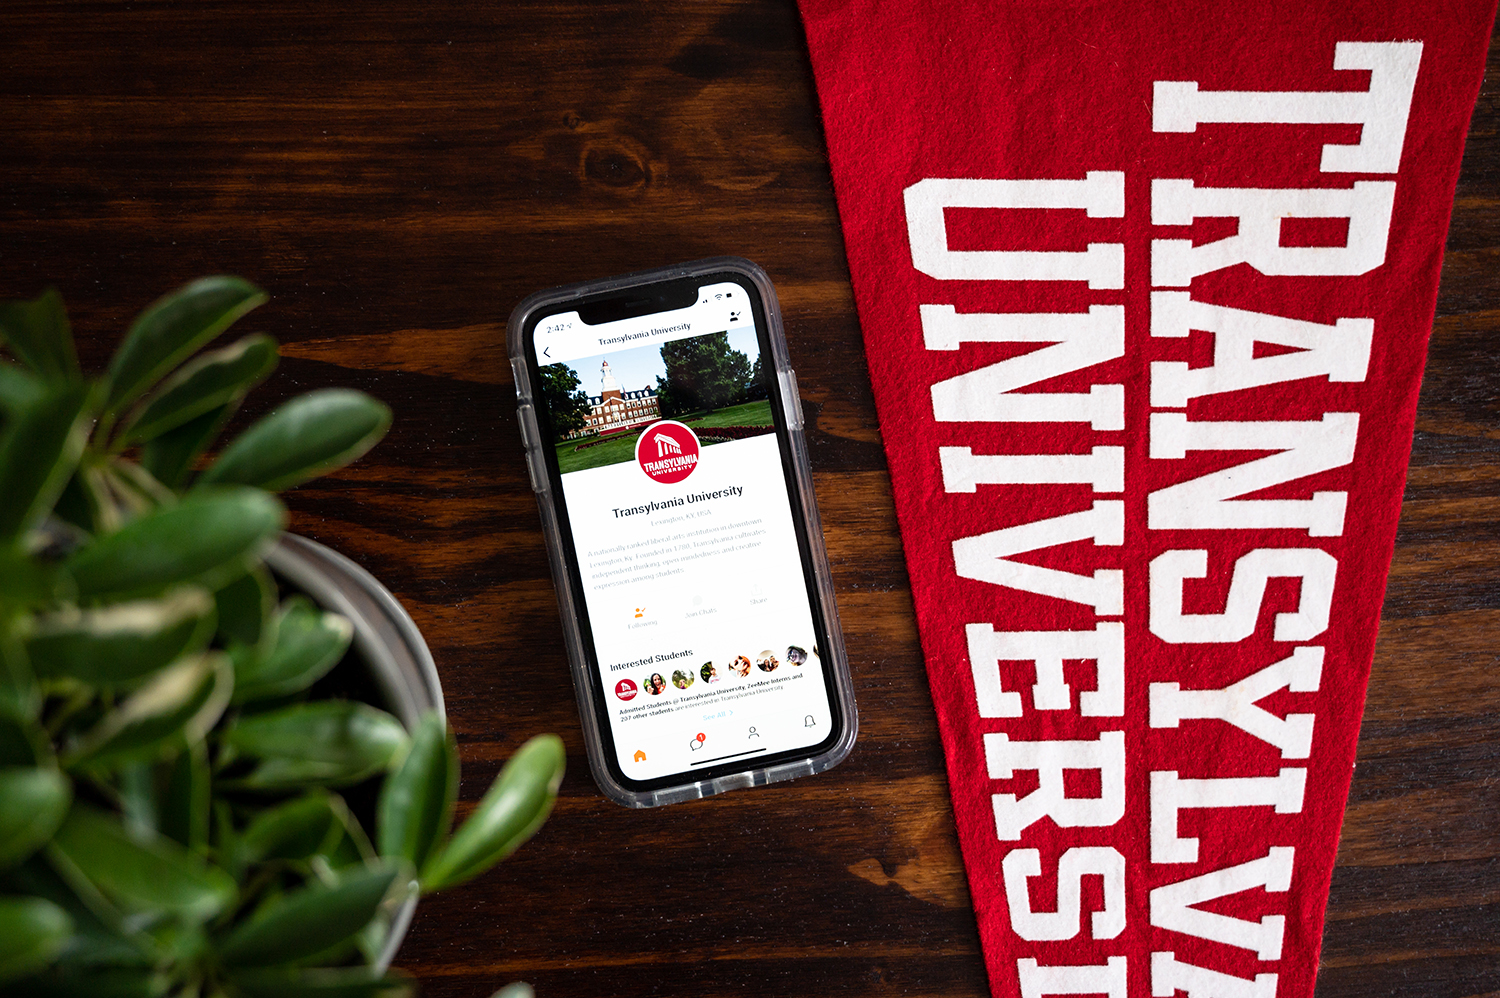 ZeeMee app helps Transylvania admitted students build community from a distance